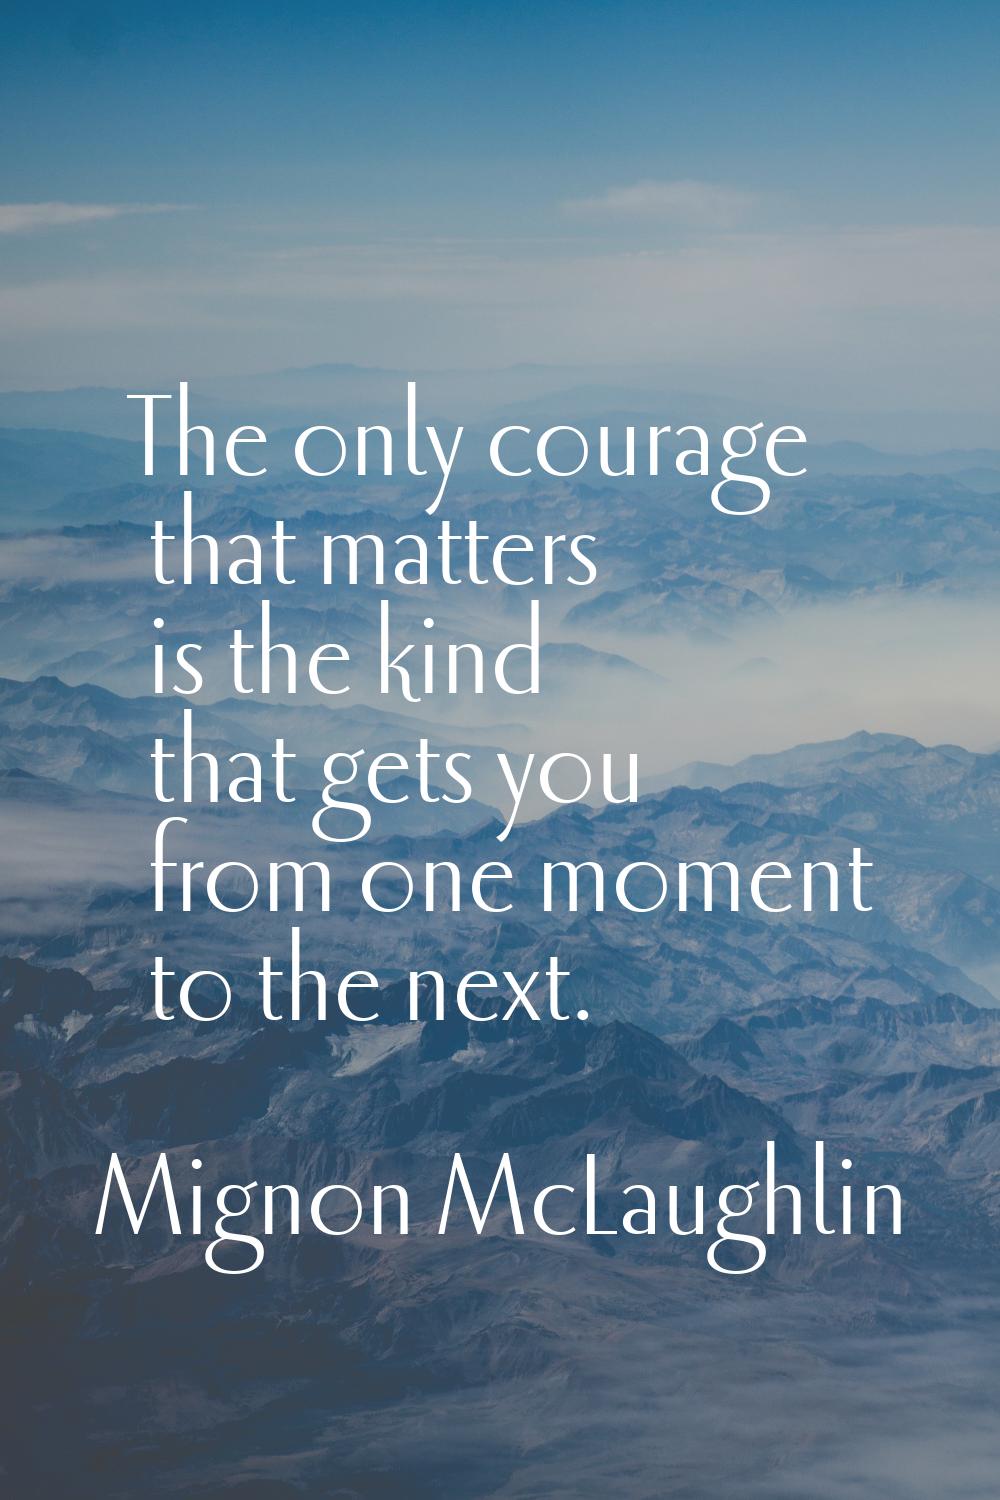 The only courage that matters is the kind that gets you from one moment to the next.